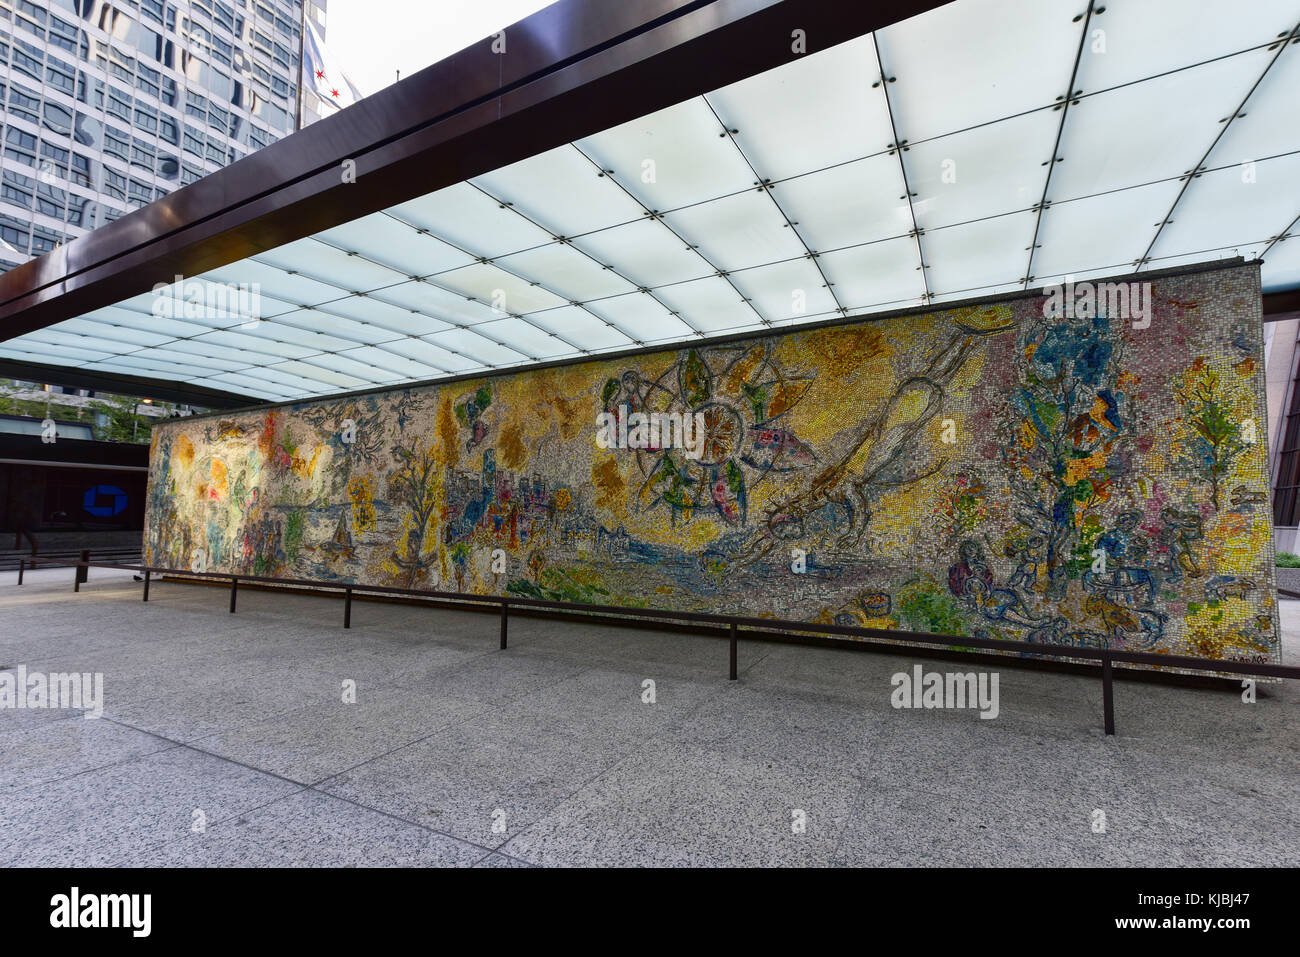 Chicago - September 6, 2015: Four Seasons is a mosaic by Marc Chagall that is located in Chase Tower Plaza in the Loop district of Chicago, Illinois. Stock Photo